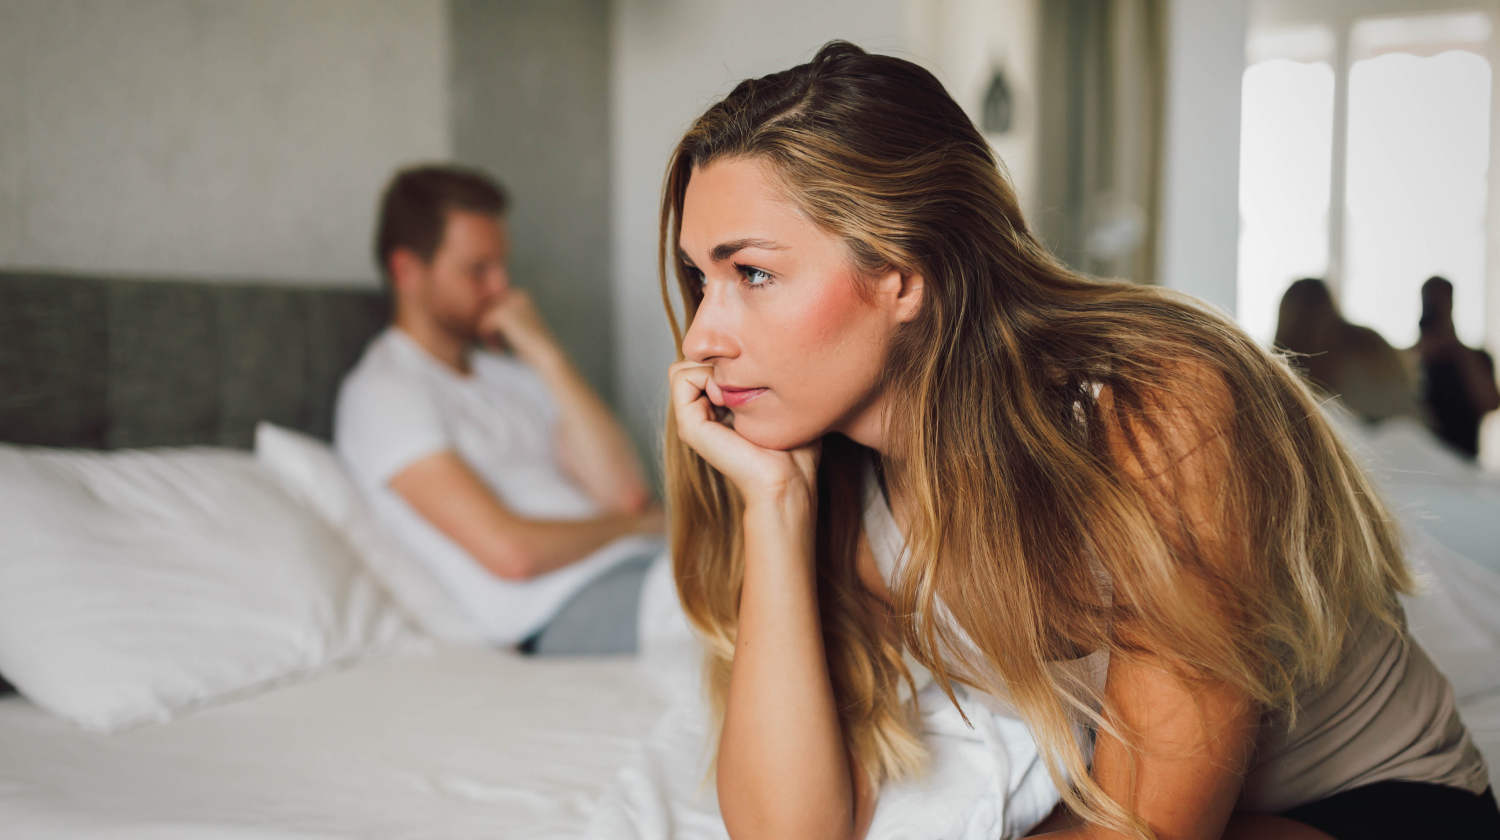 separation anxiety in relationships